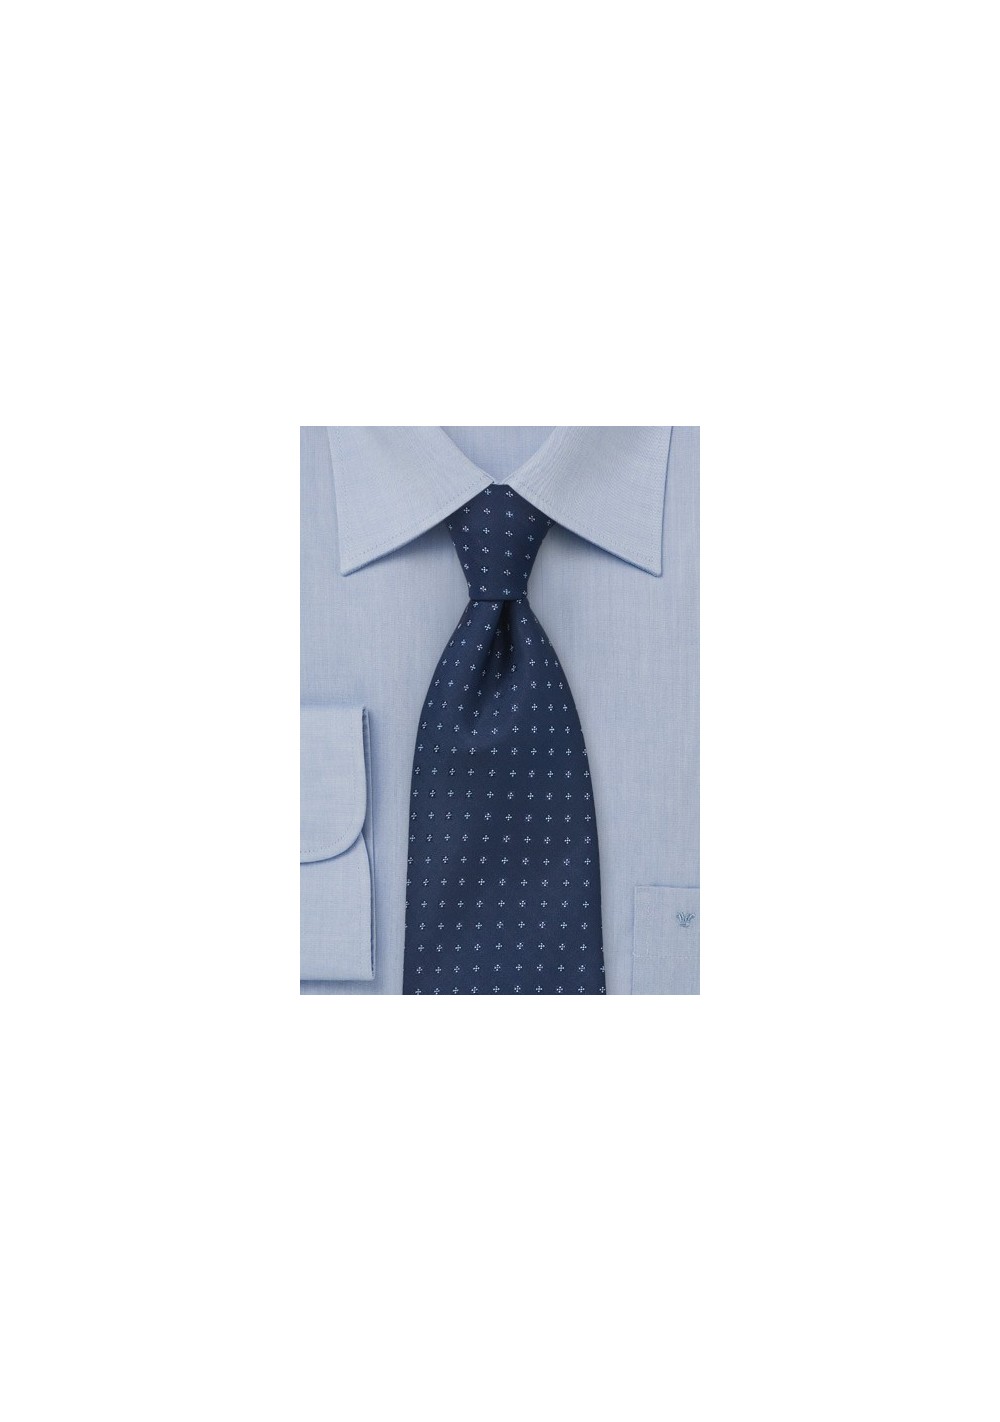 Traditionally Patterned Tie in Blues